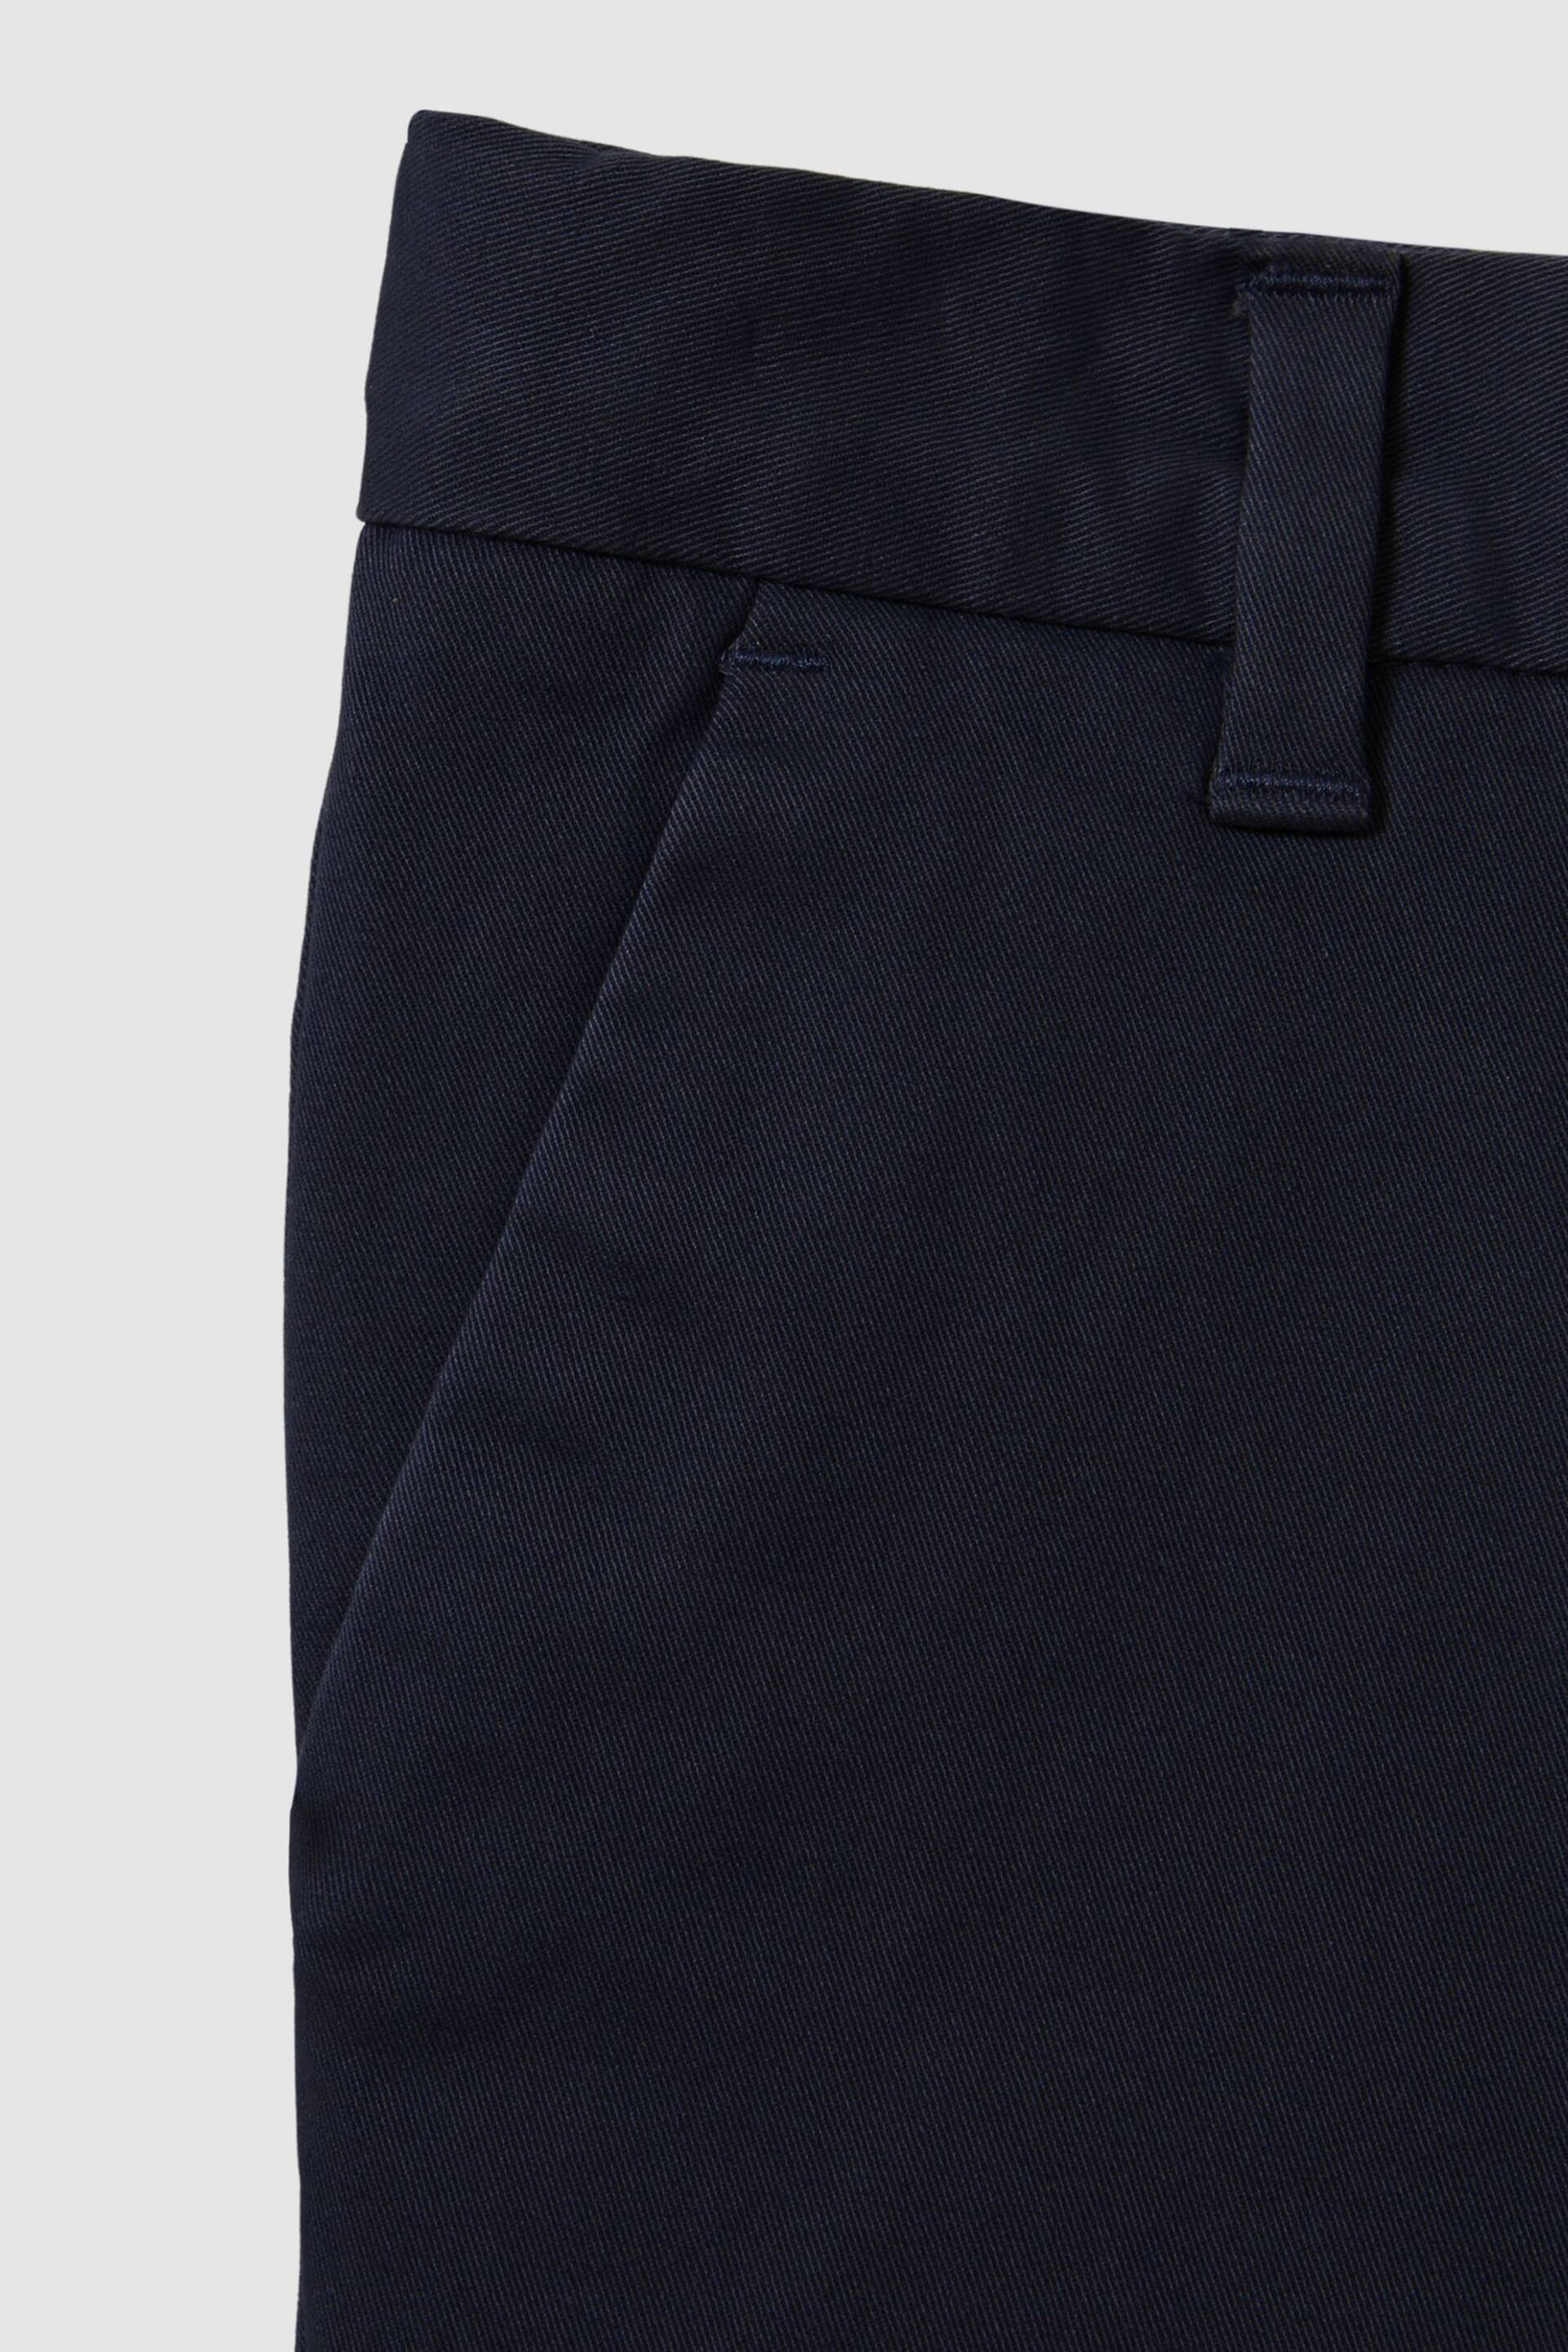 Reiss Navy Wicket Teen Casual Chino Shorts - Image 5 of 5